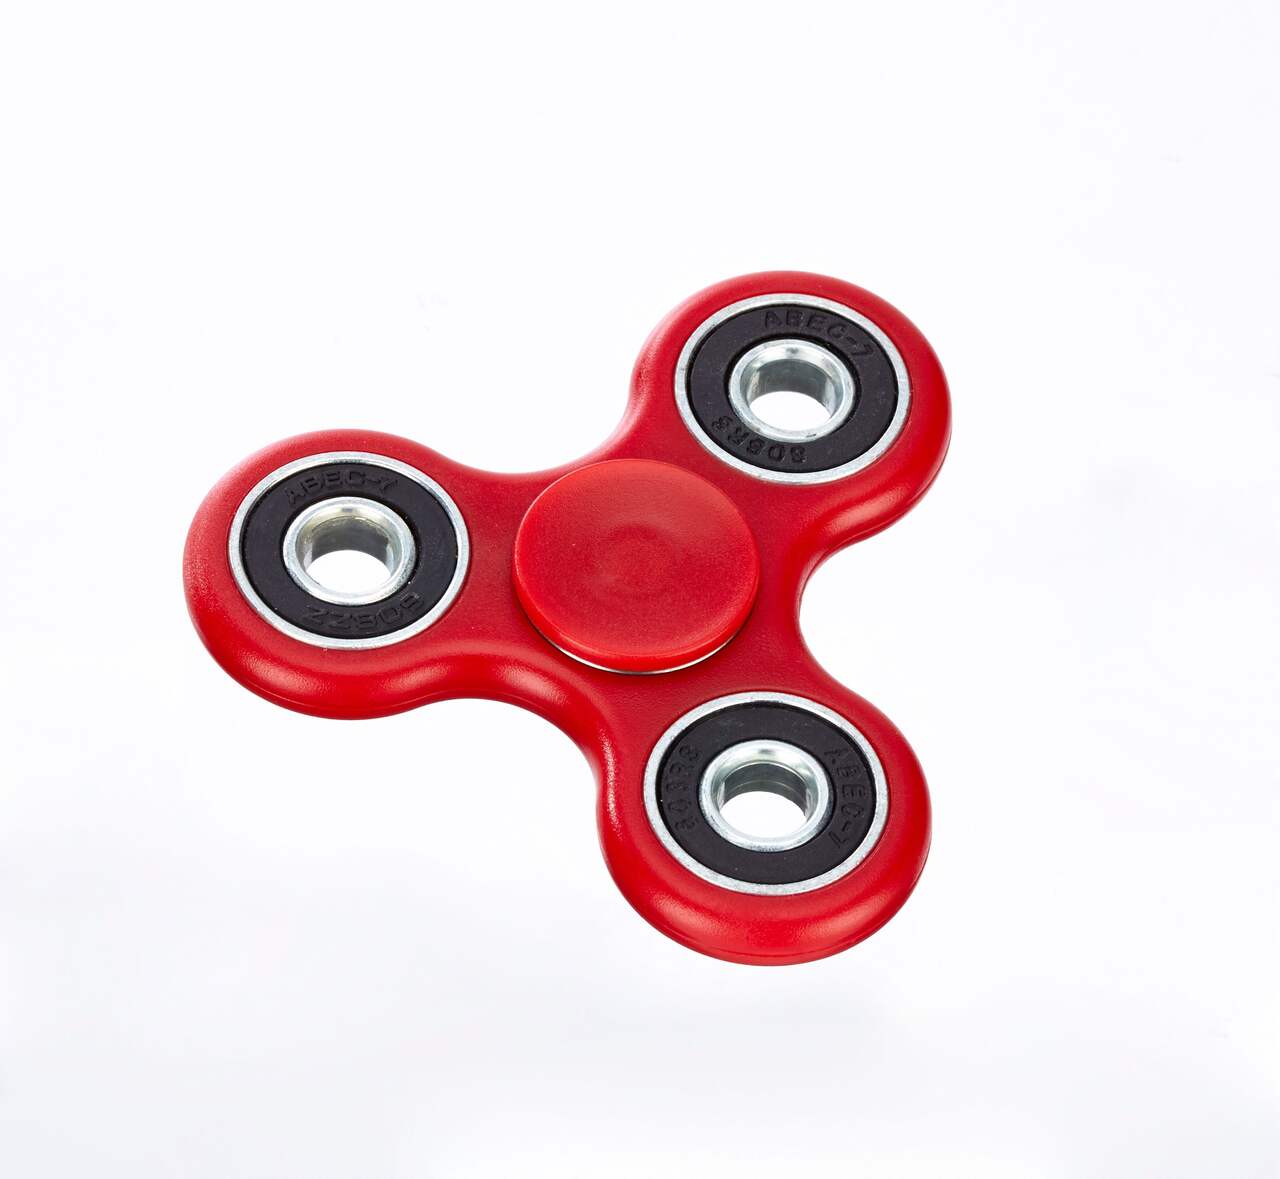 Fidget Spinner - White, Shop Today. Get it Tomorrow!